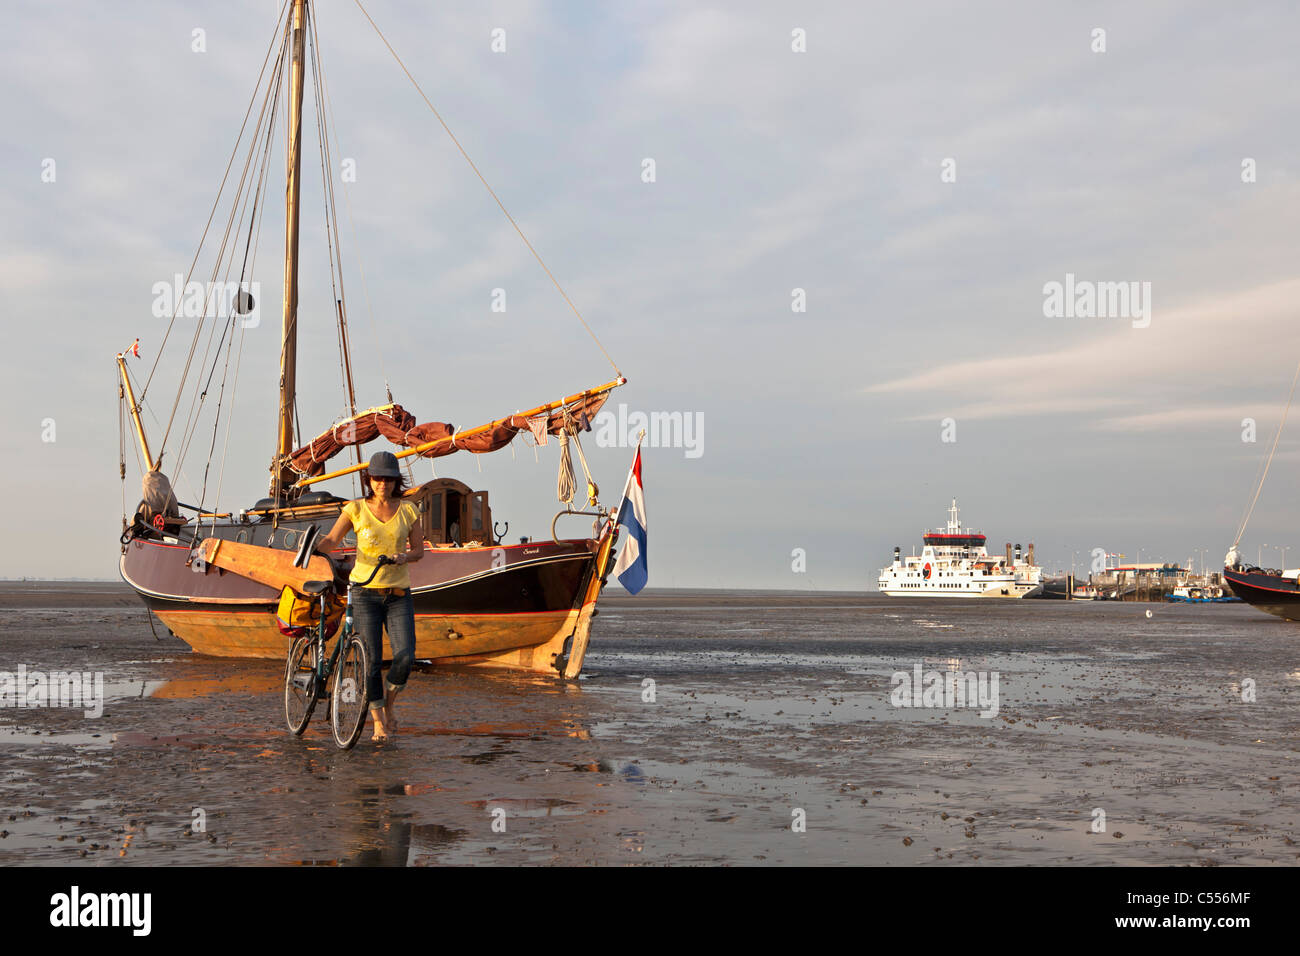 Nes, Ameland Island, Wadden Sea Islands. Sailing boat on mud flat in harbour. Woman and bicycle. Ferry boat to mainland. Stock Photo